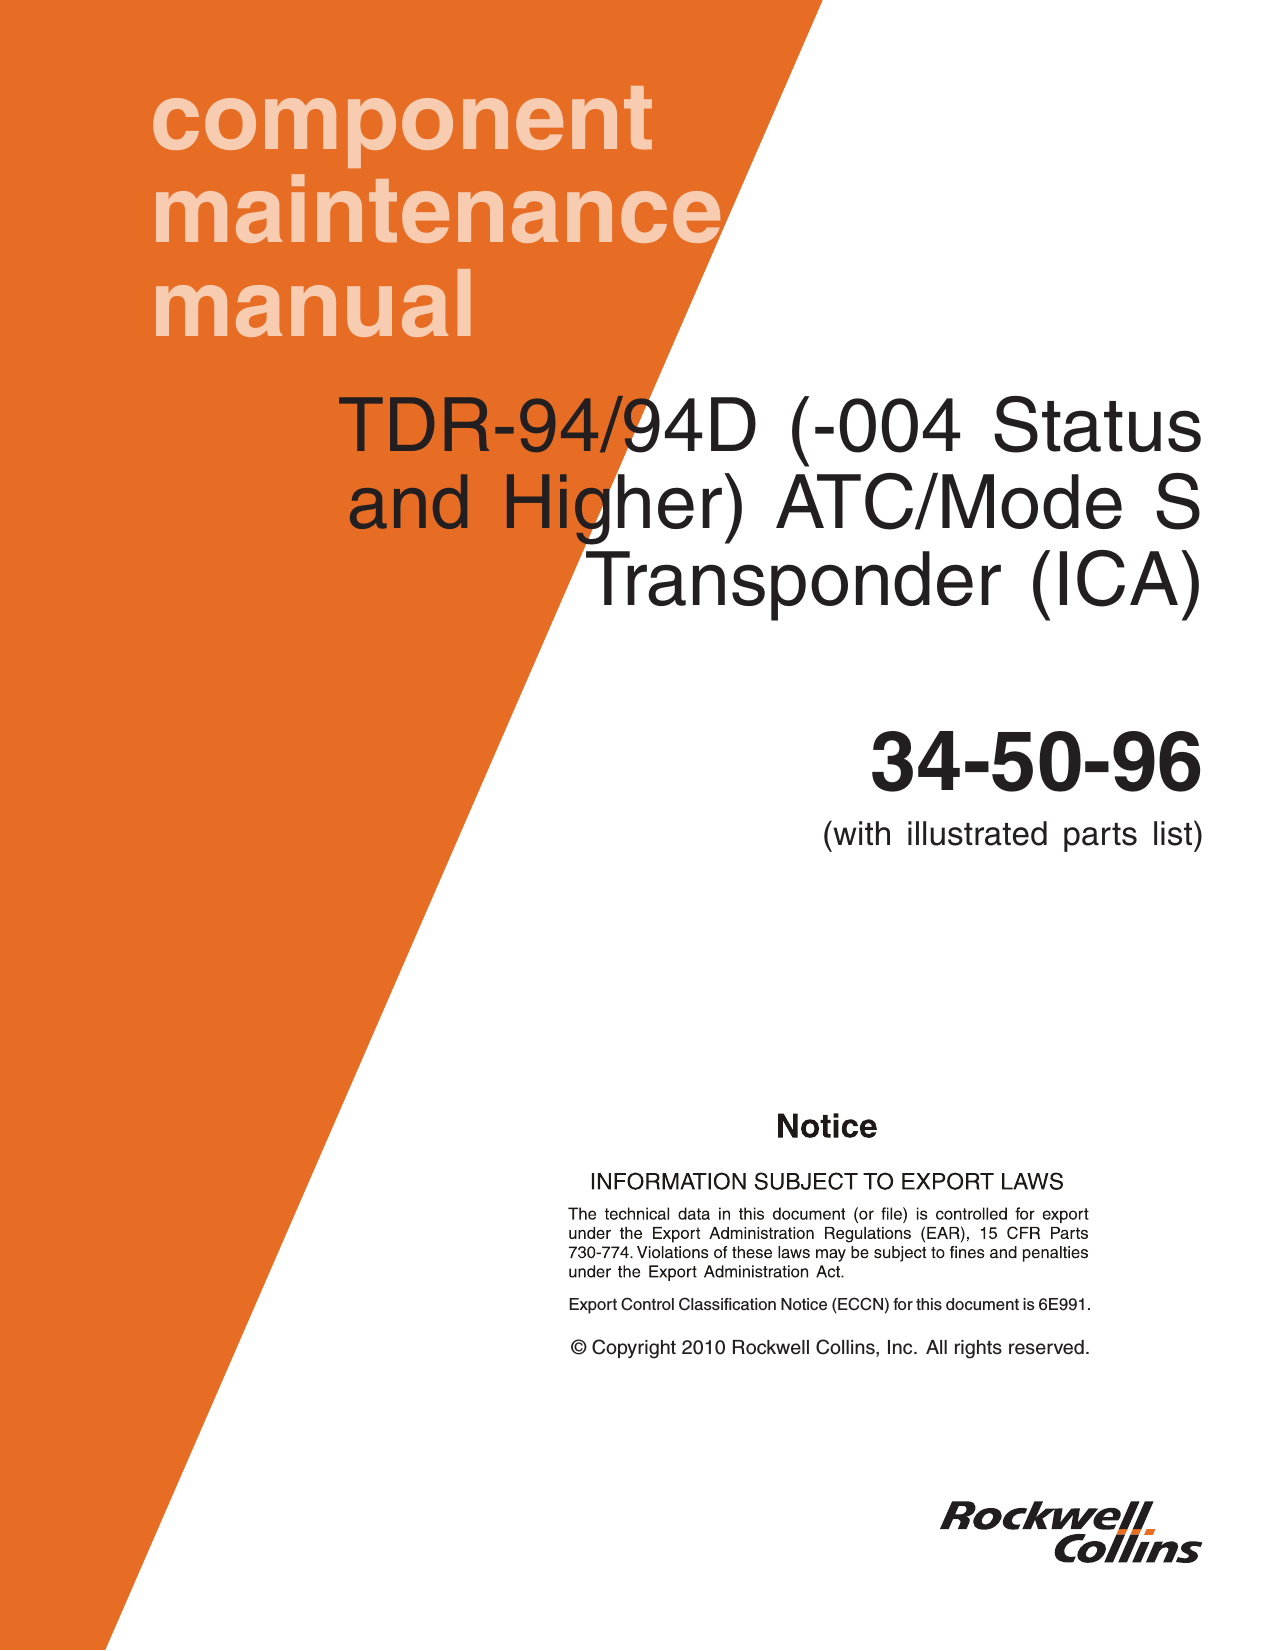 componentmaintenancemanualTDR-94/94D (-004 Statusand Higher) ATC/Mode STransponder (ICA)34-50-96(with illustrated parts list)Export Control Classification Notice (ECCN) for this document is 6E991.© Copyright 2010 Rockwell Collins, Inc. All rights reserved.